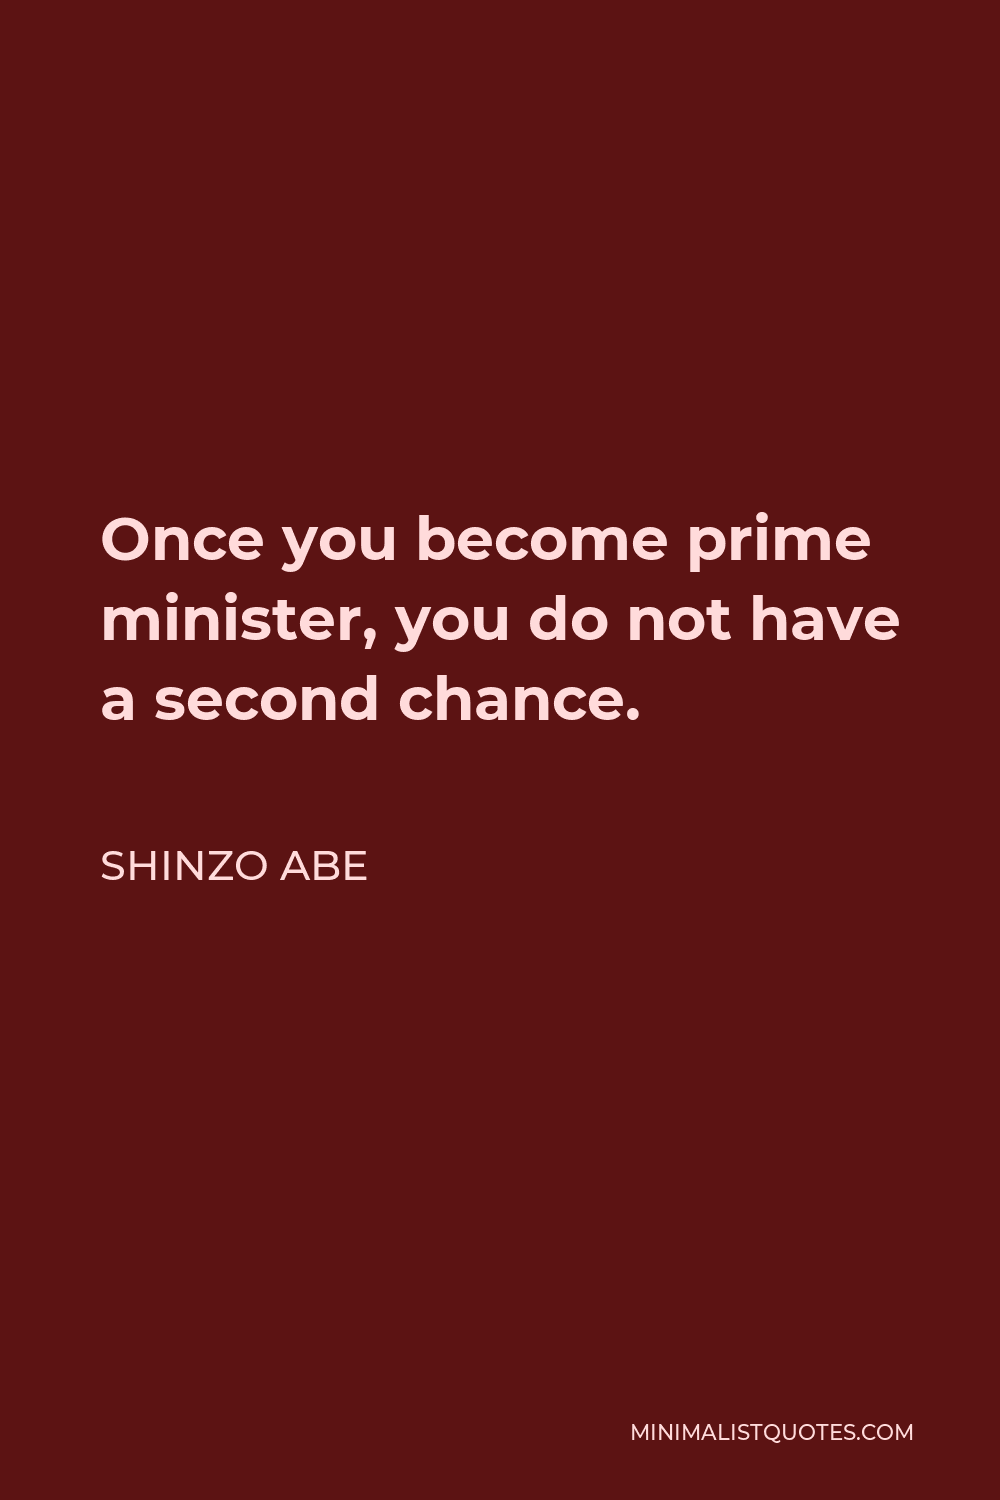 Shinzo Abe Quote - Once you become prime minister, you do not have a second chance.